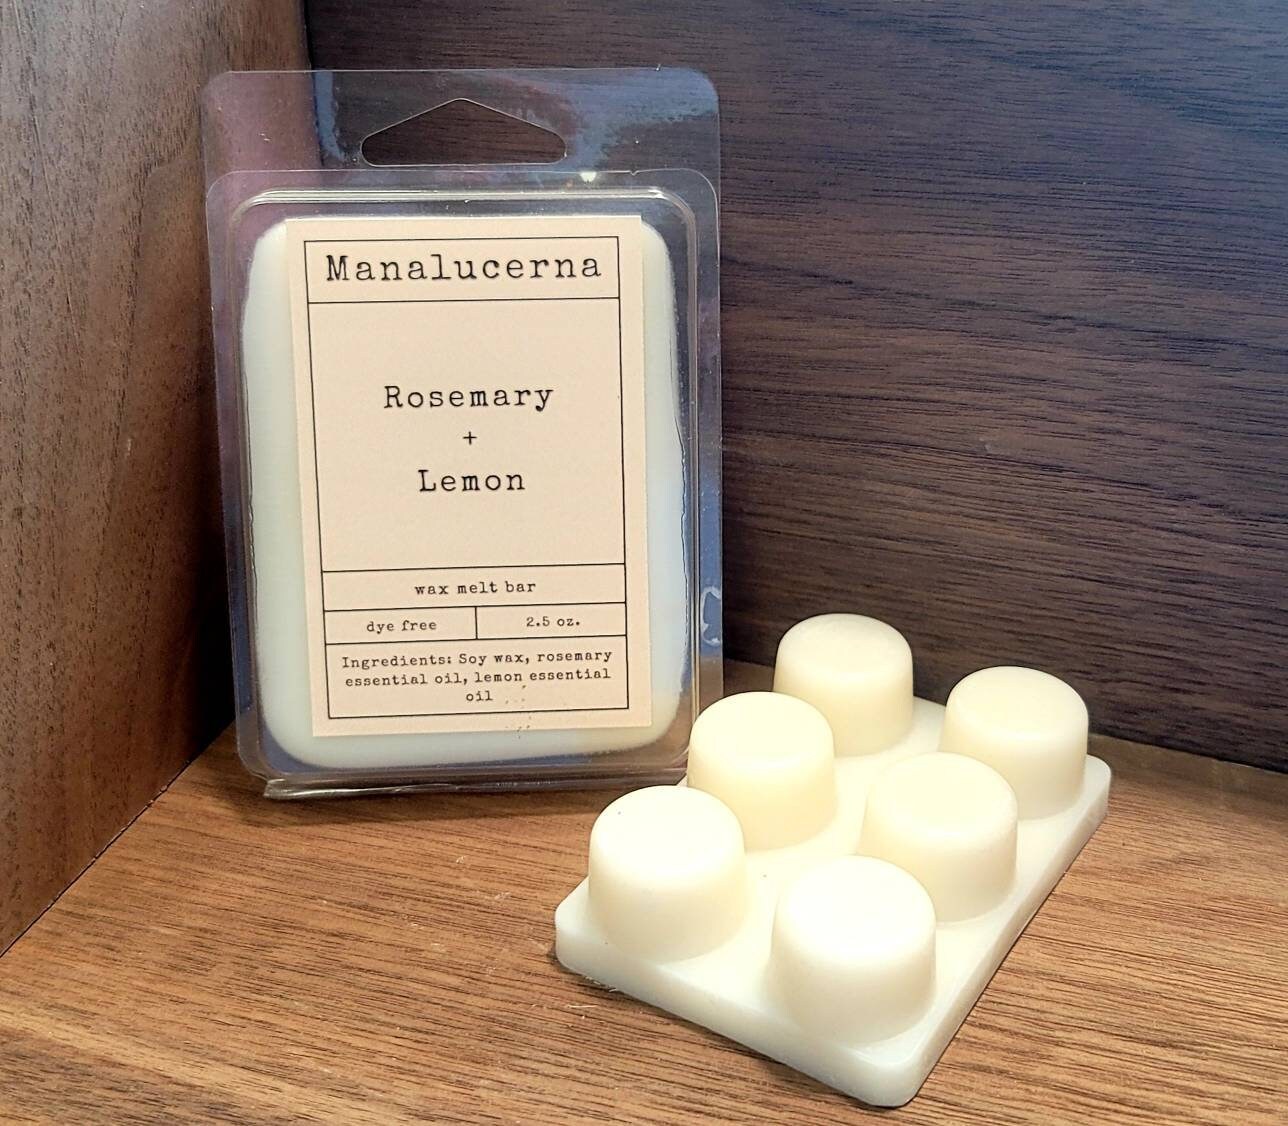 Black Pepper Rosemary ScentSationals Wax Melt Review - Candlefind